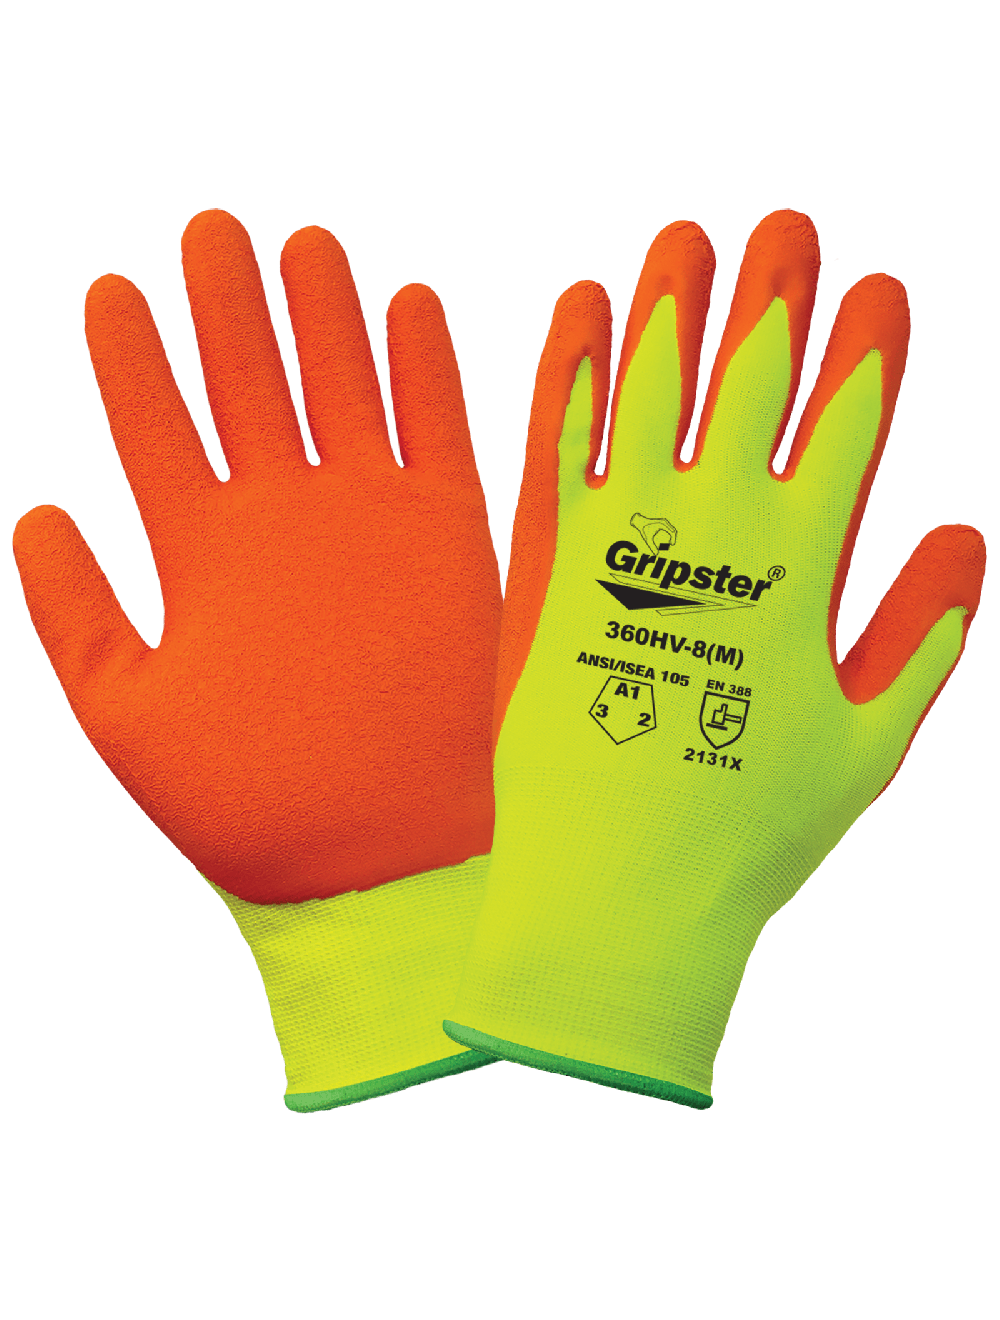 Global Glove and Safety Hand Protection, Eye Protection, Cooling  Protection, Heat Stress, Cut Resistant Protection Gripster® Orange Etched  Rubber Coated High-Visibility Lightweight Gloves with Cut, Abrasion, and  Puncture Protection - 360HV